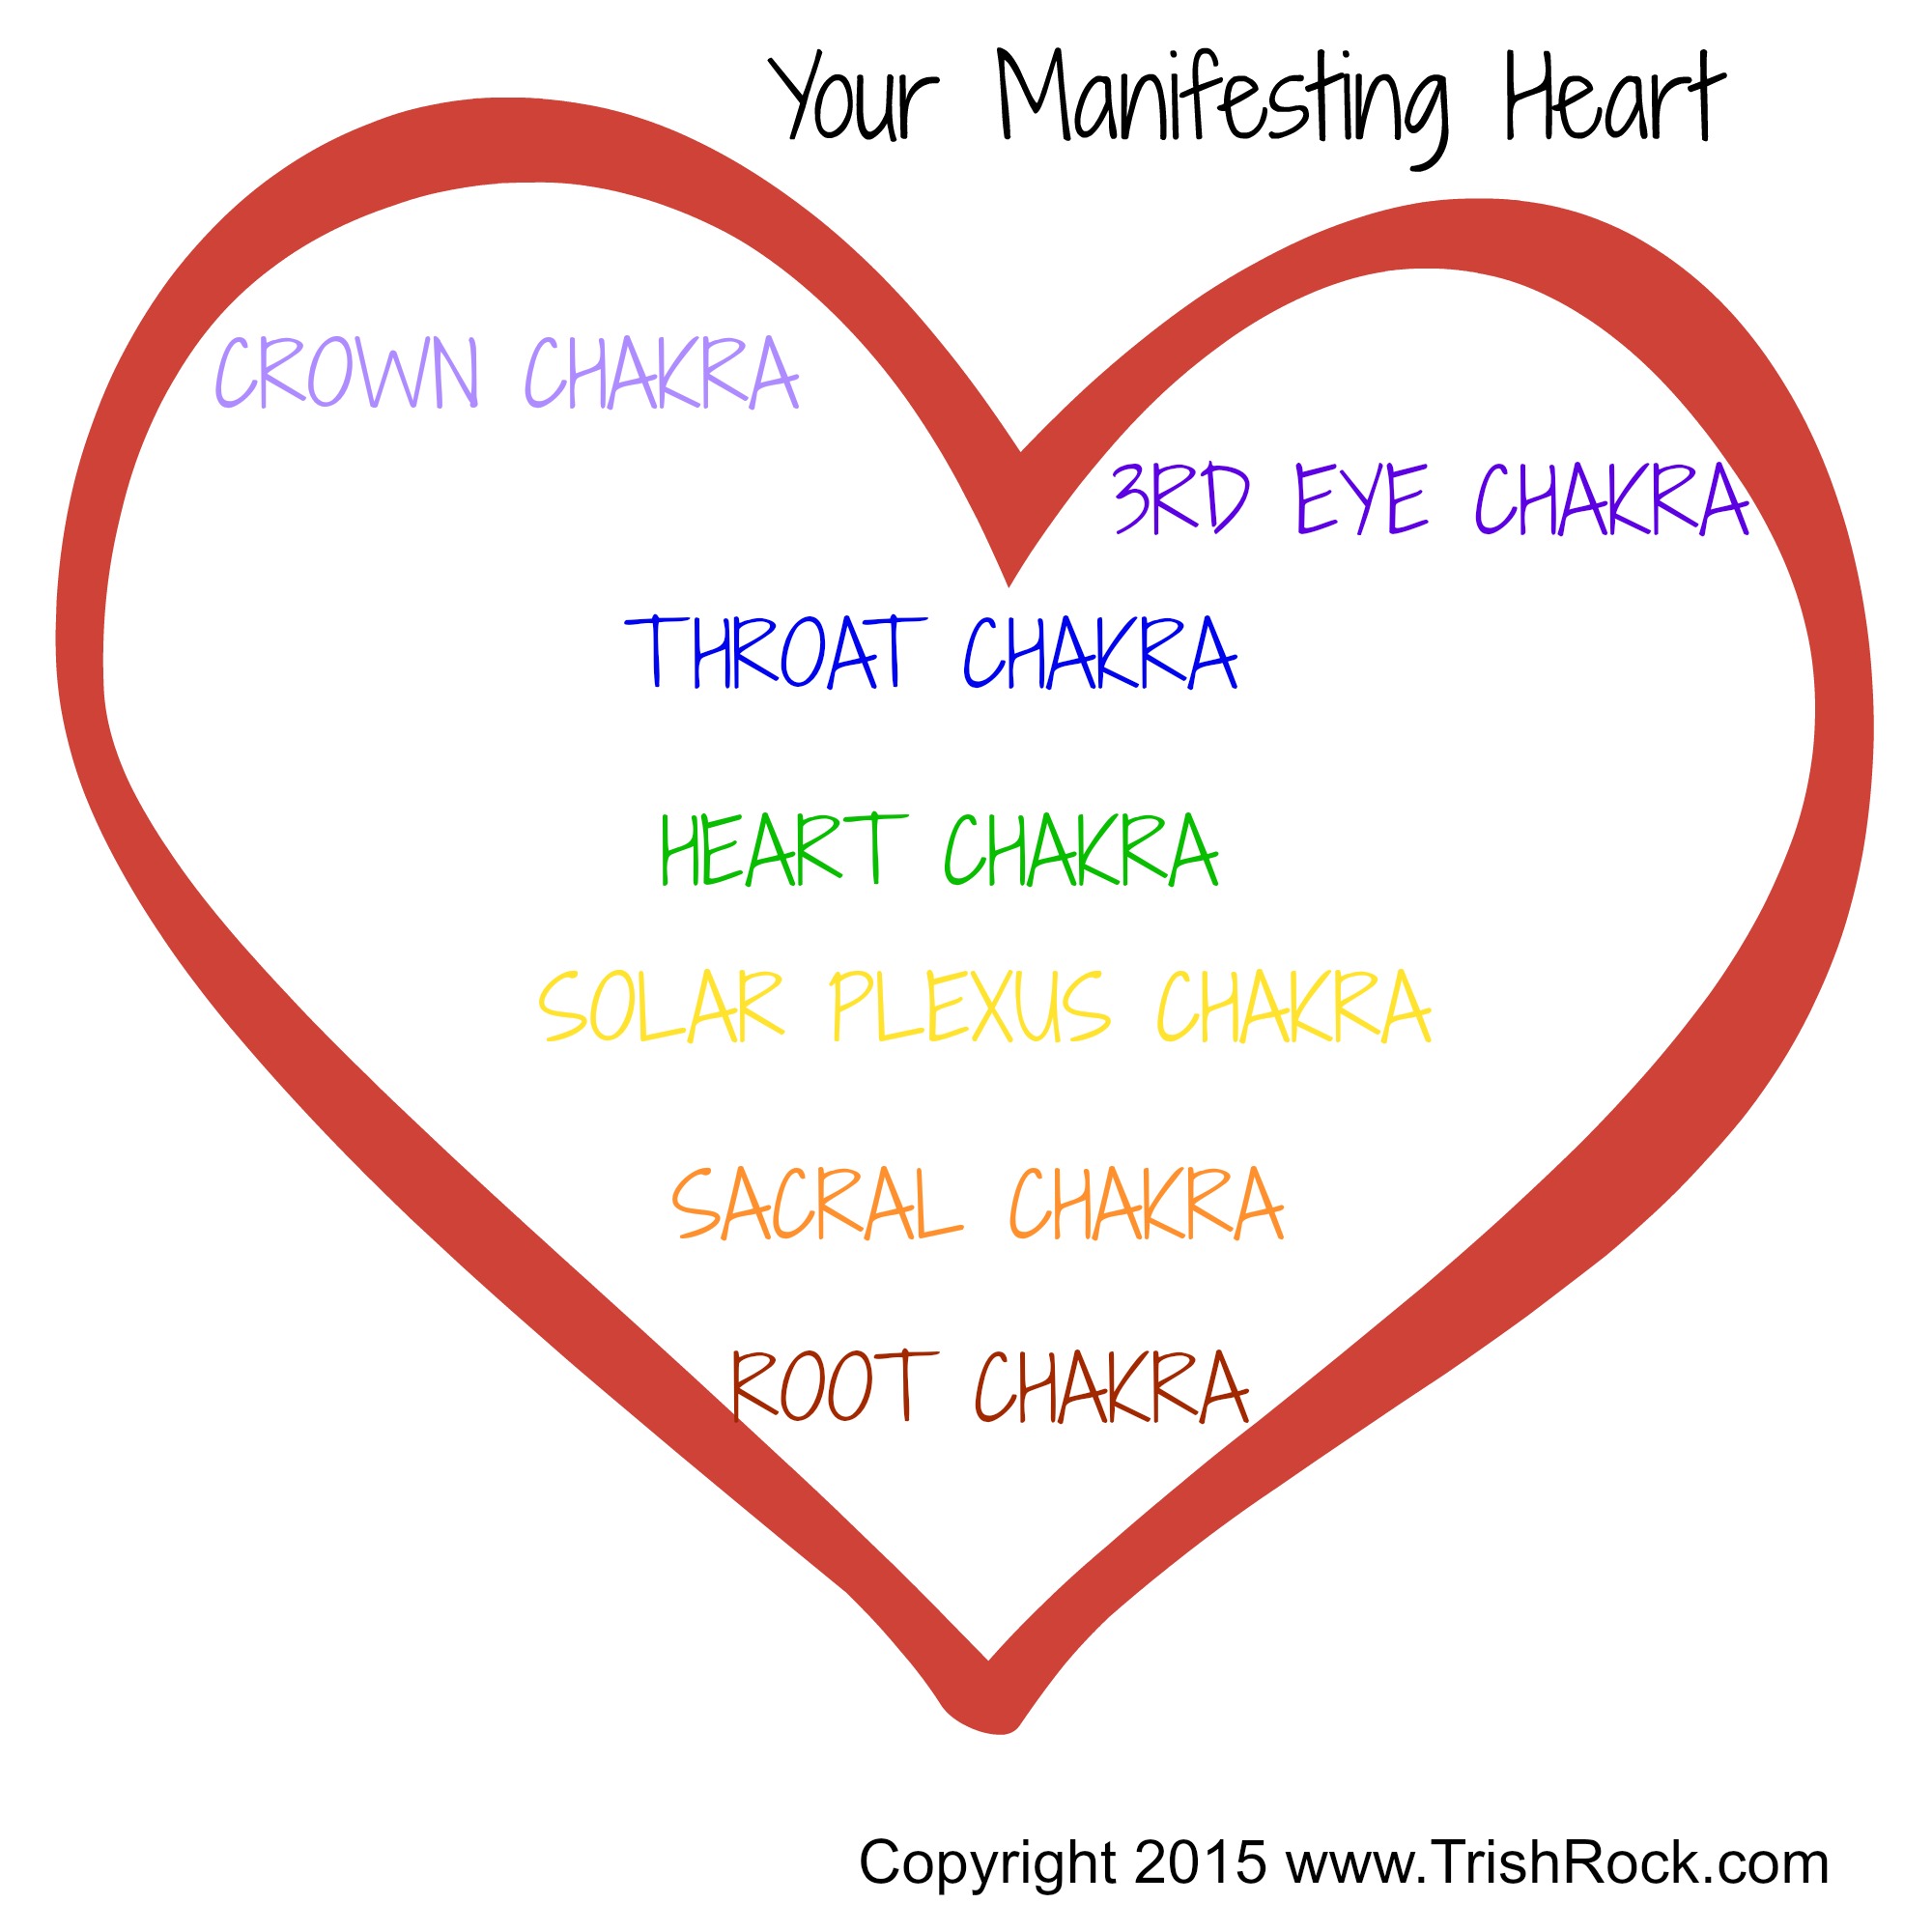 The Power Of: Your Manifesting Heart